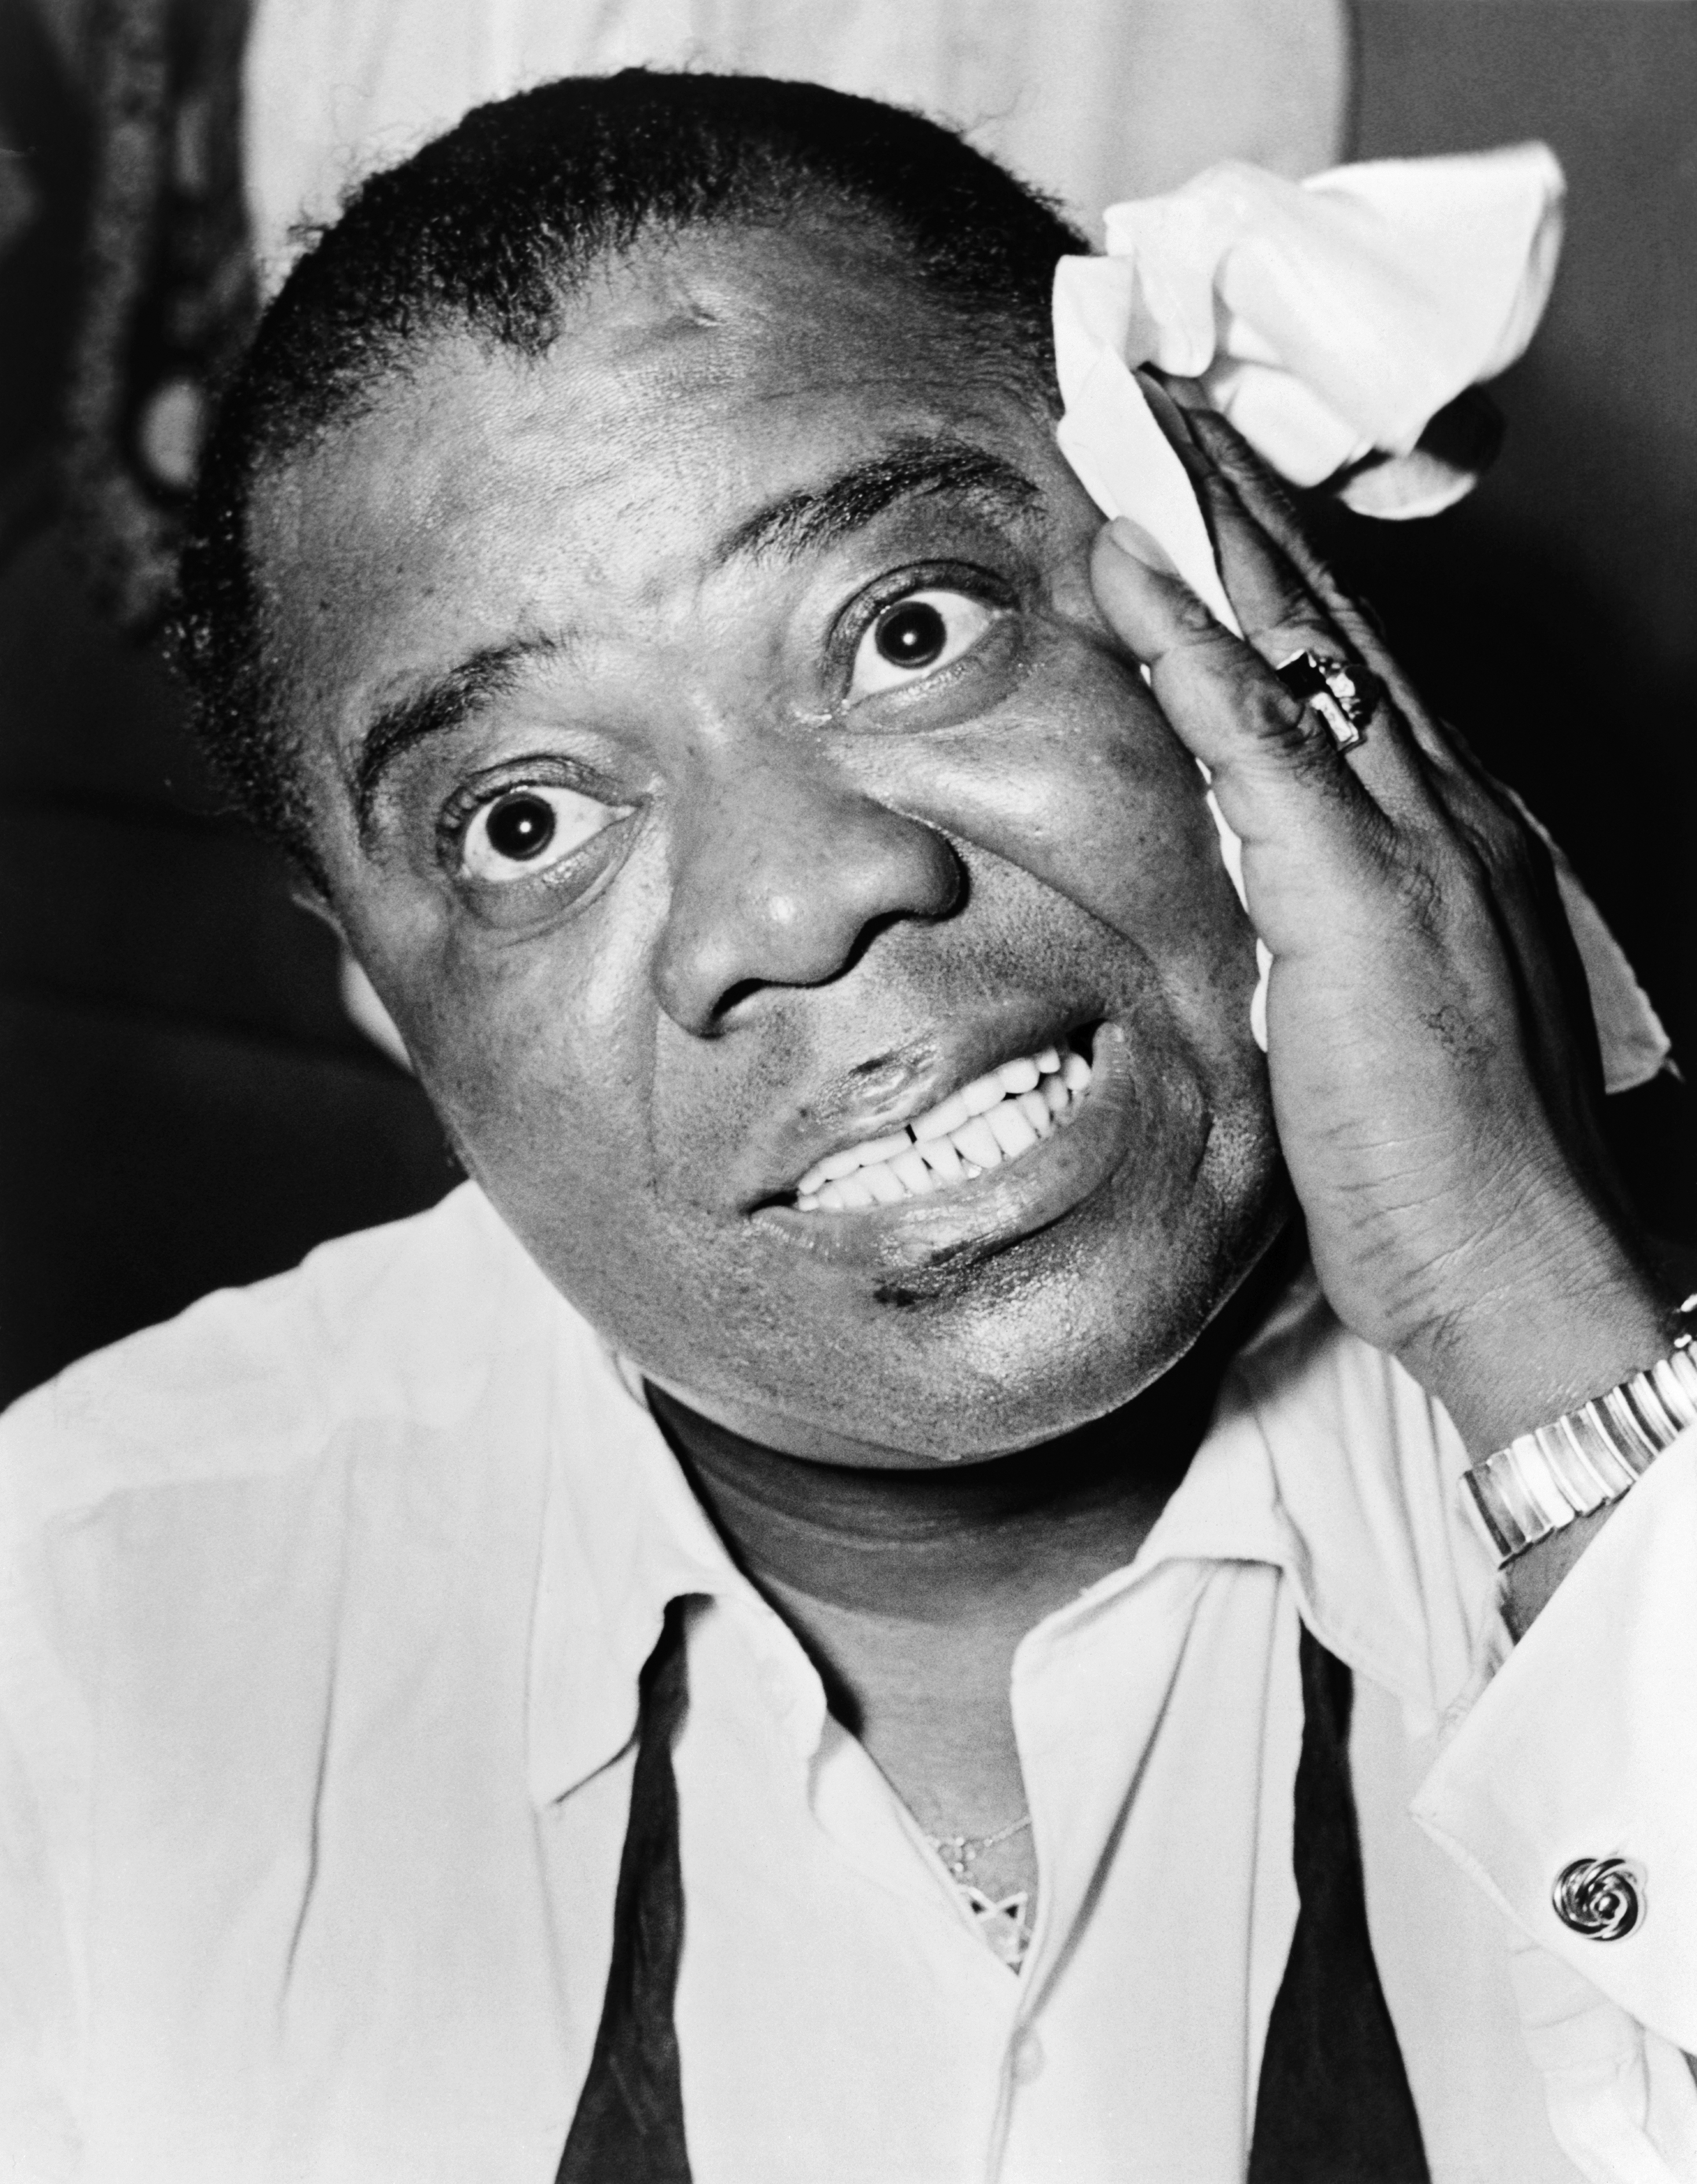 Louis Armstrong - Wikipedia